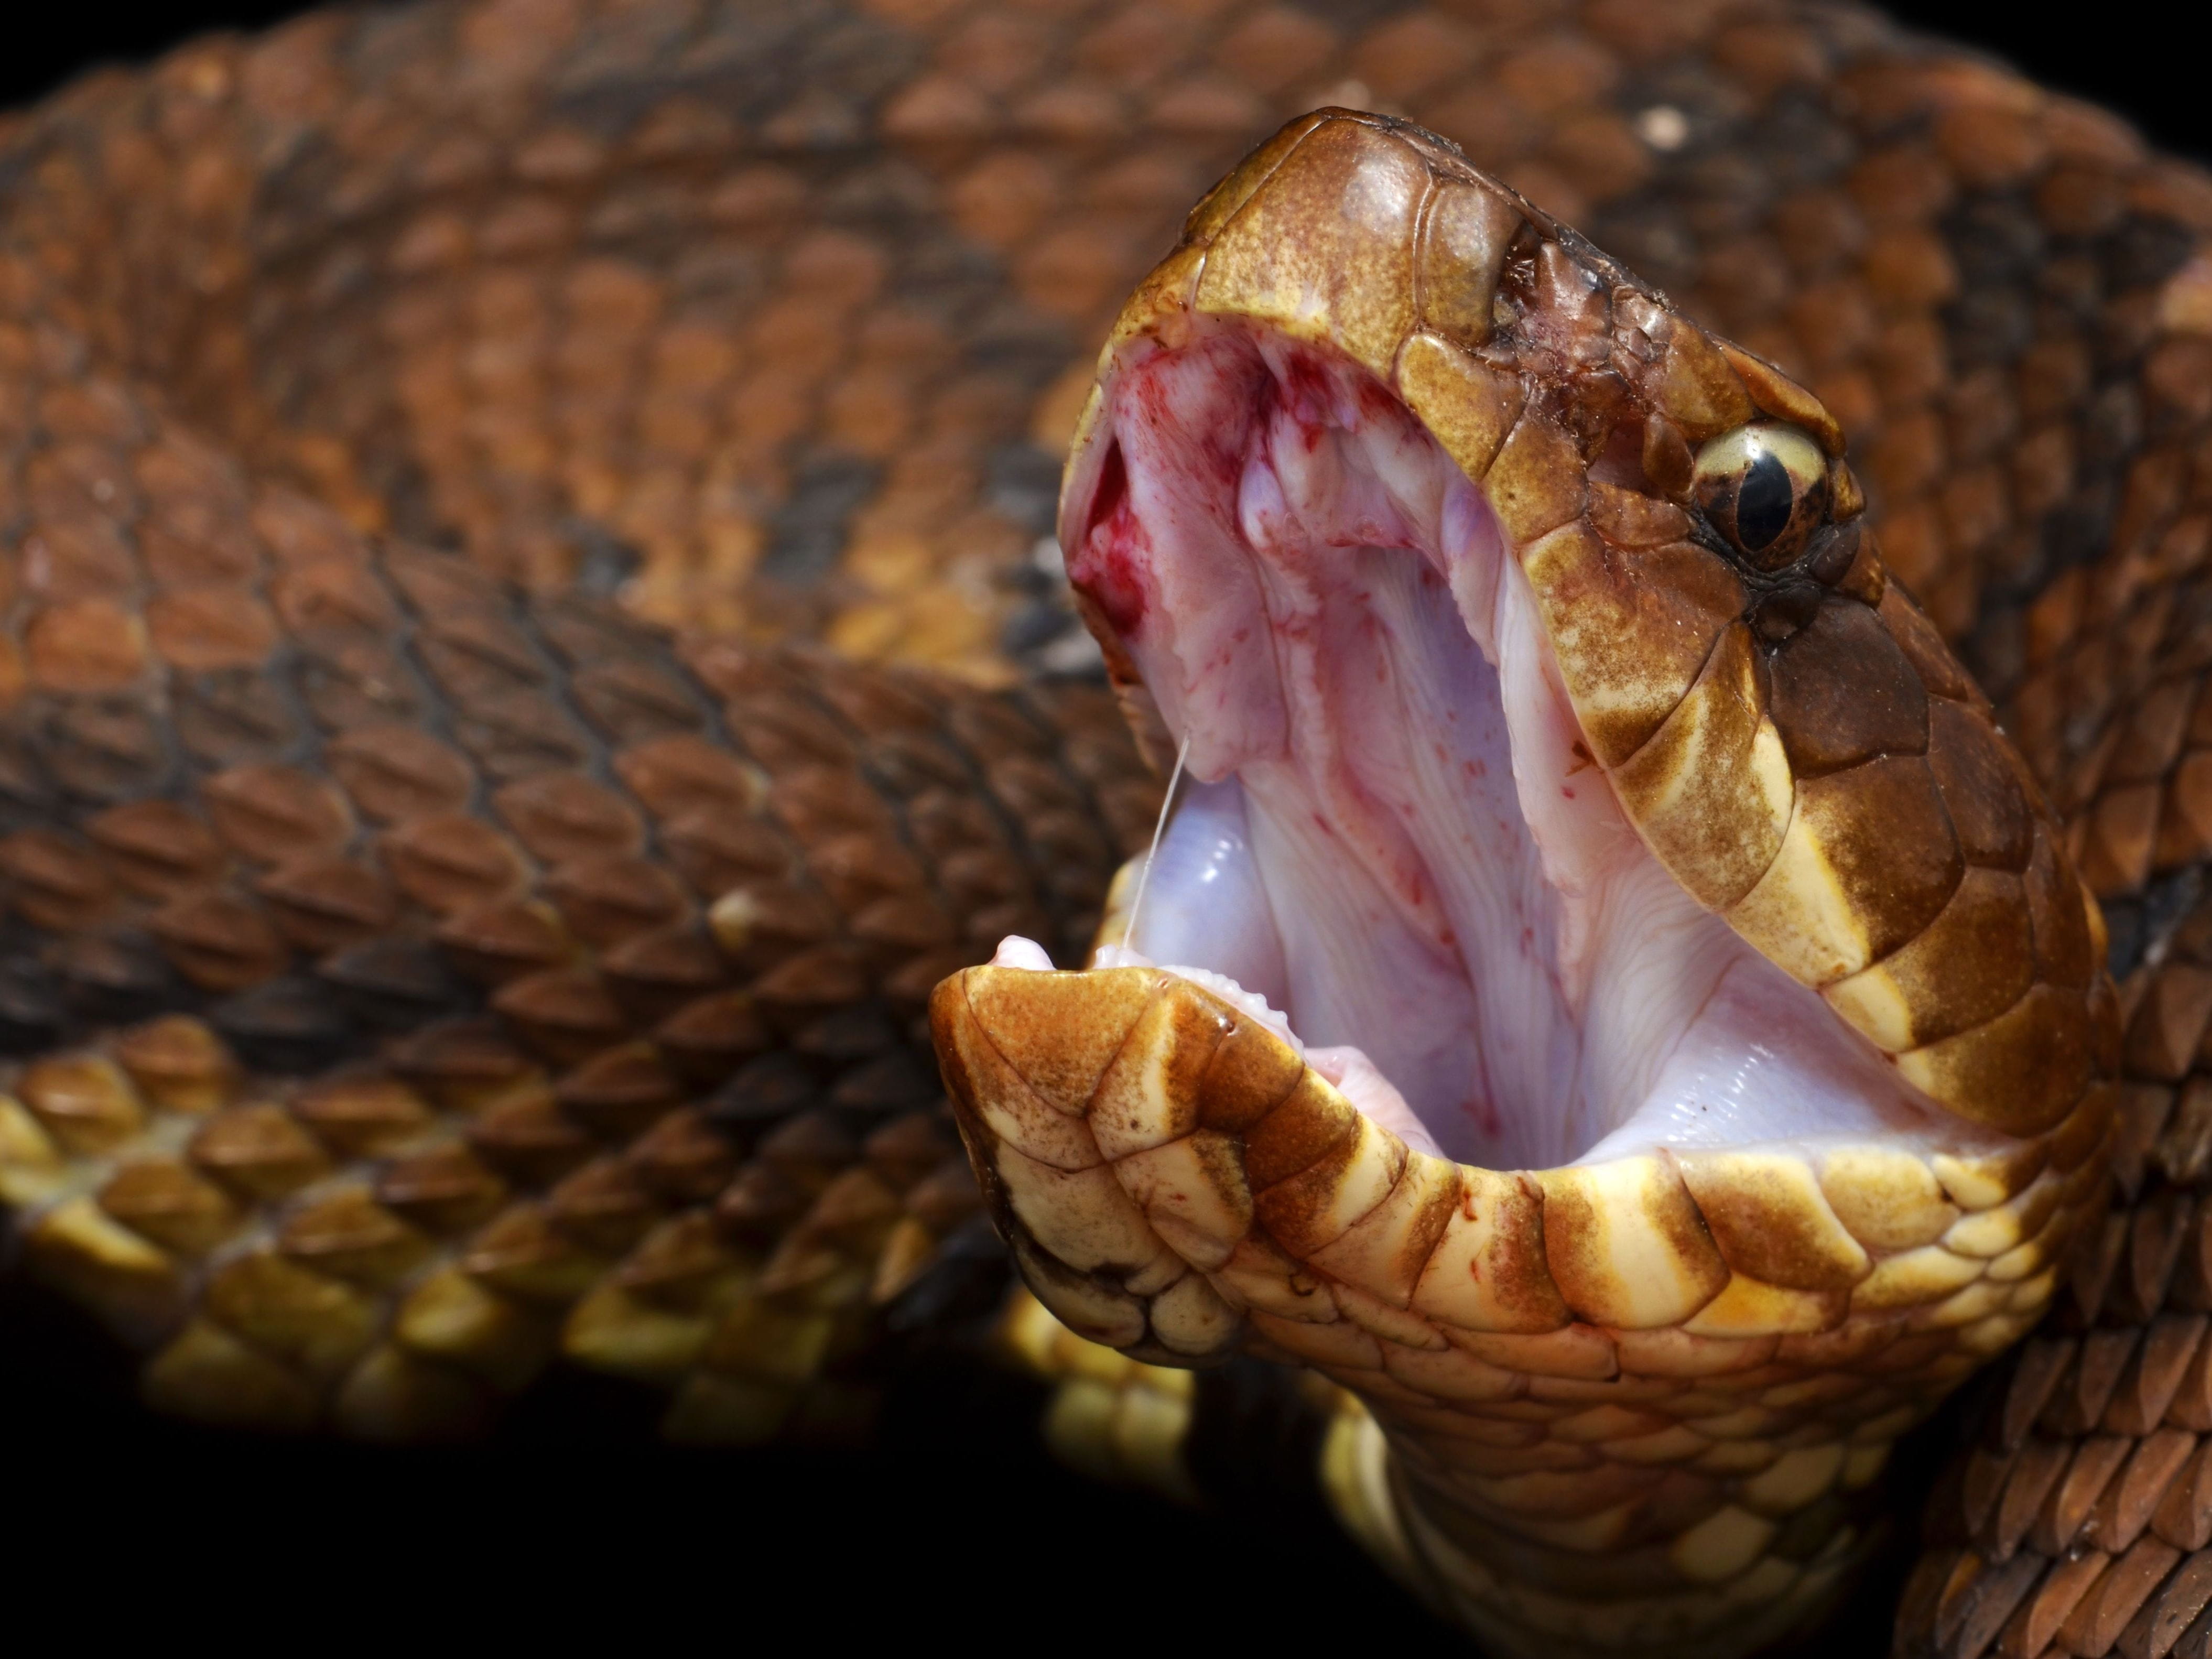 Eastern Cottonmouth or Water Moccasin (Agkistrodon Piscivorus Piscivorus) showing his cotton like mouth.